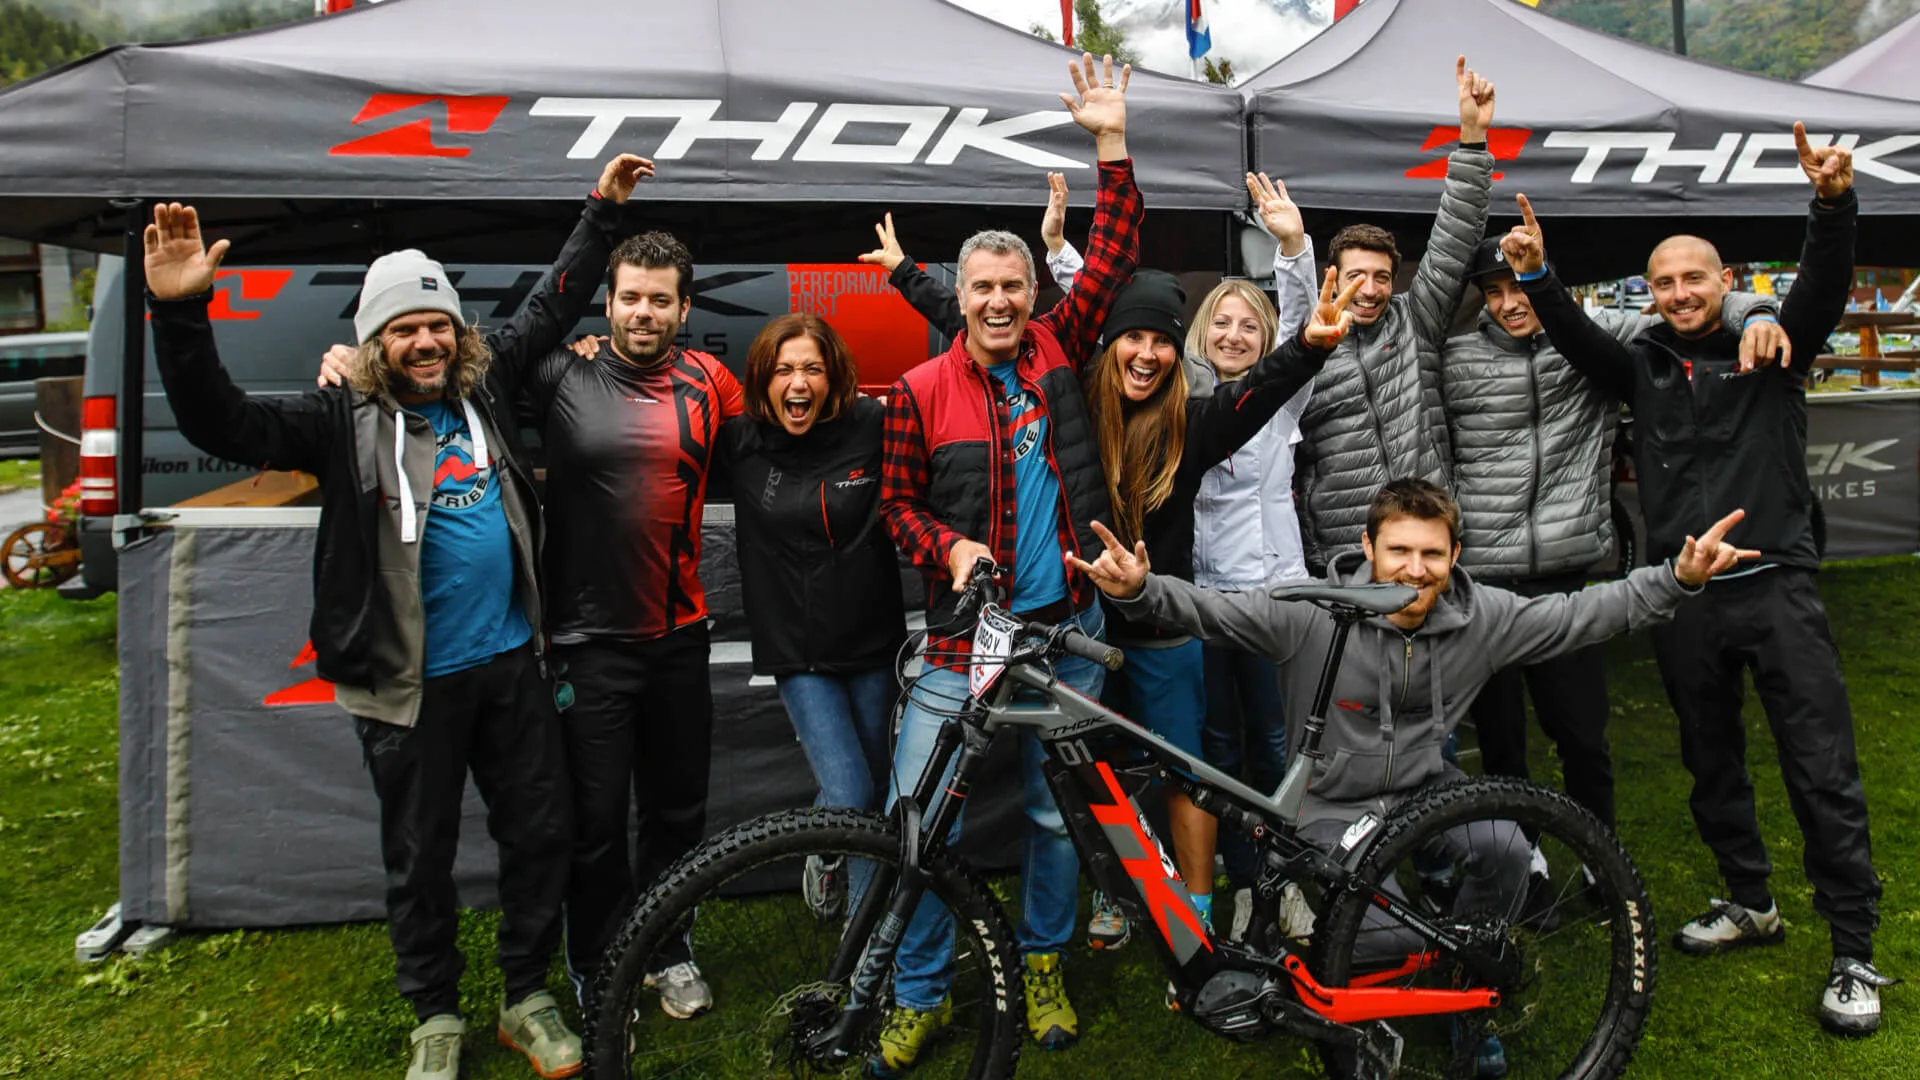 Thok news - THOK TRIBE: PASSION AT ITS PUREST FOR THE BRAND’S E-MTBS – AND FOR THE BRAND ITSELF!